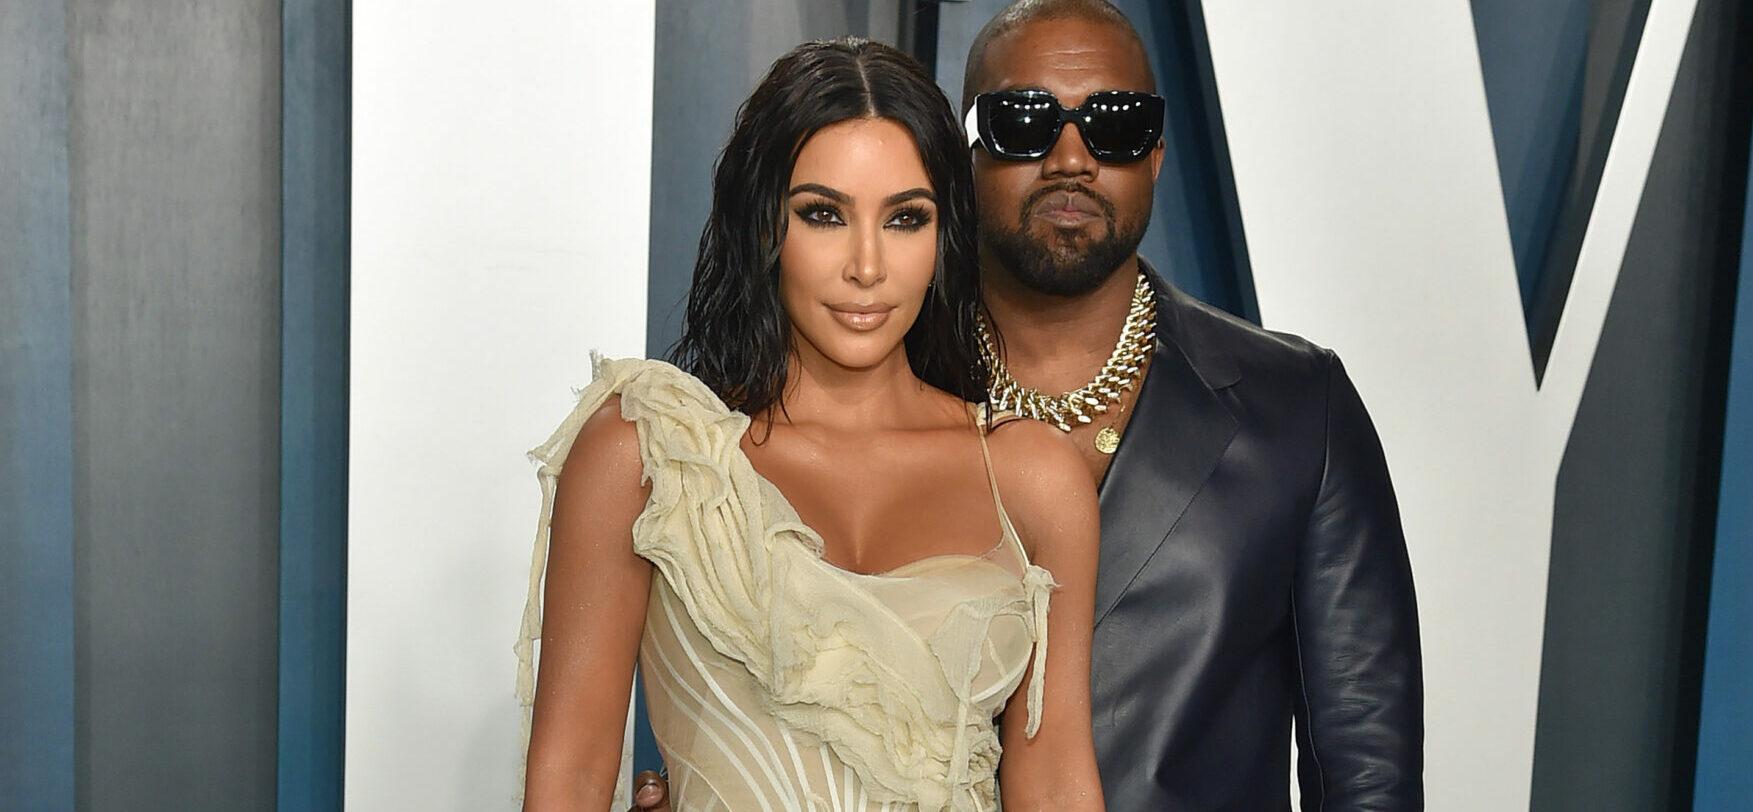 Kim Kardashian Reflects On Her Time With Kanye West: ‘You Cannot Help People That Don’t Want Help’